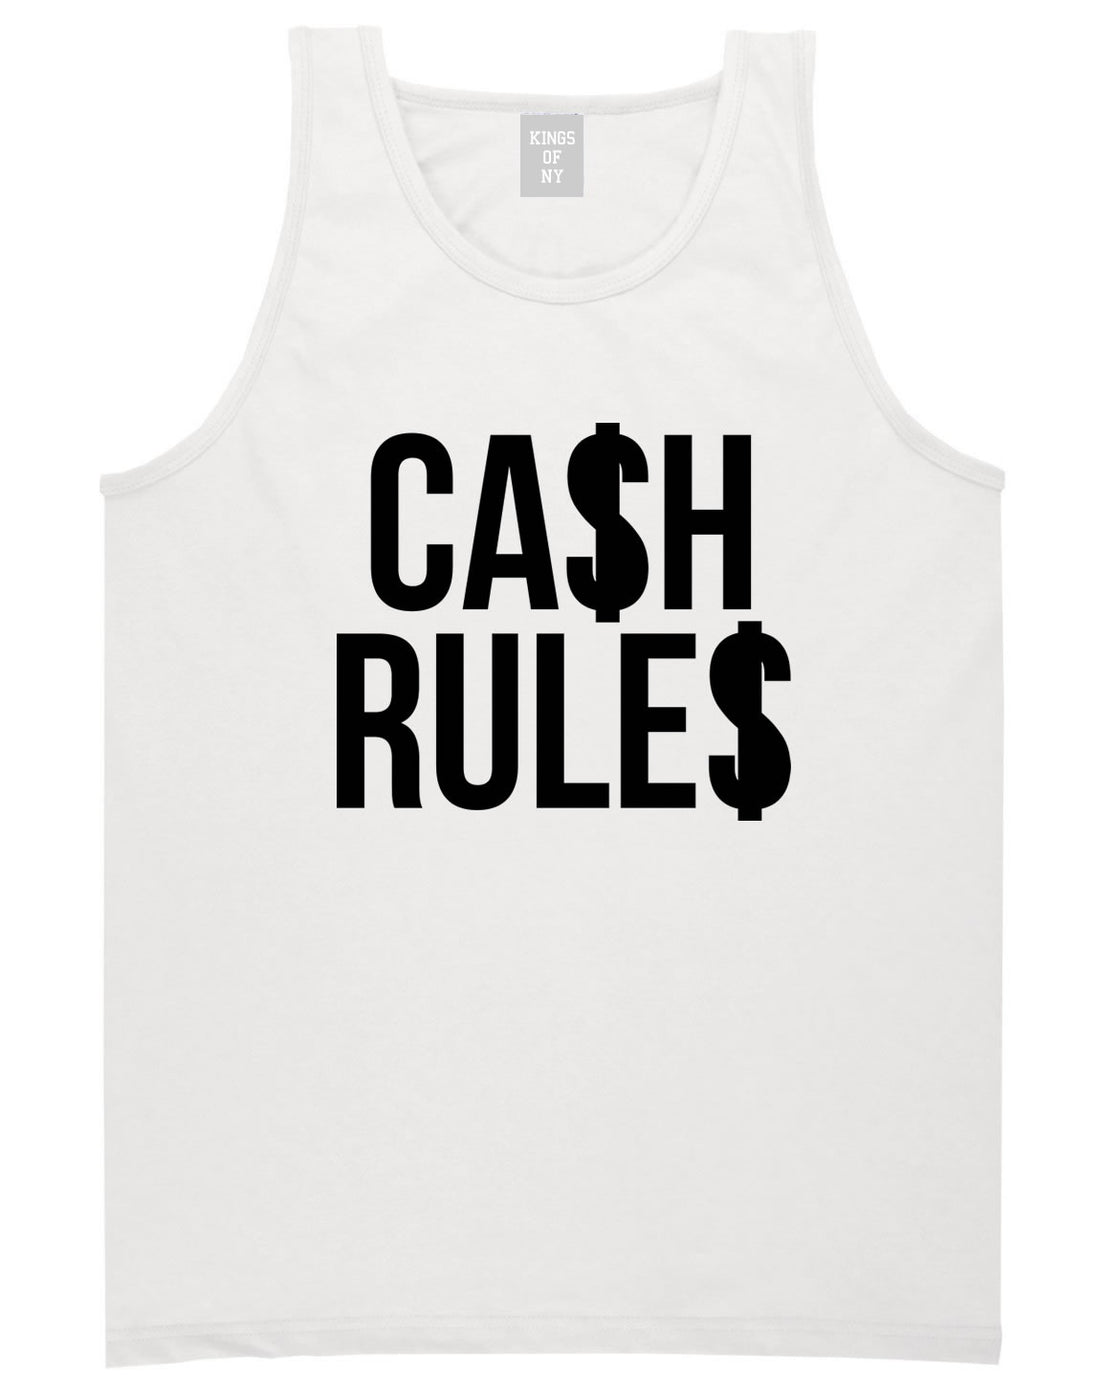 Cash Rules Tank Top in White by Kings Of NY